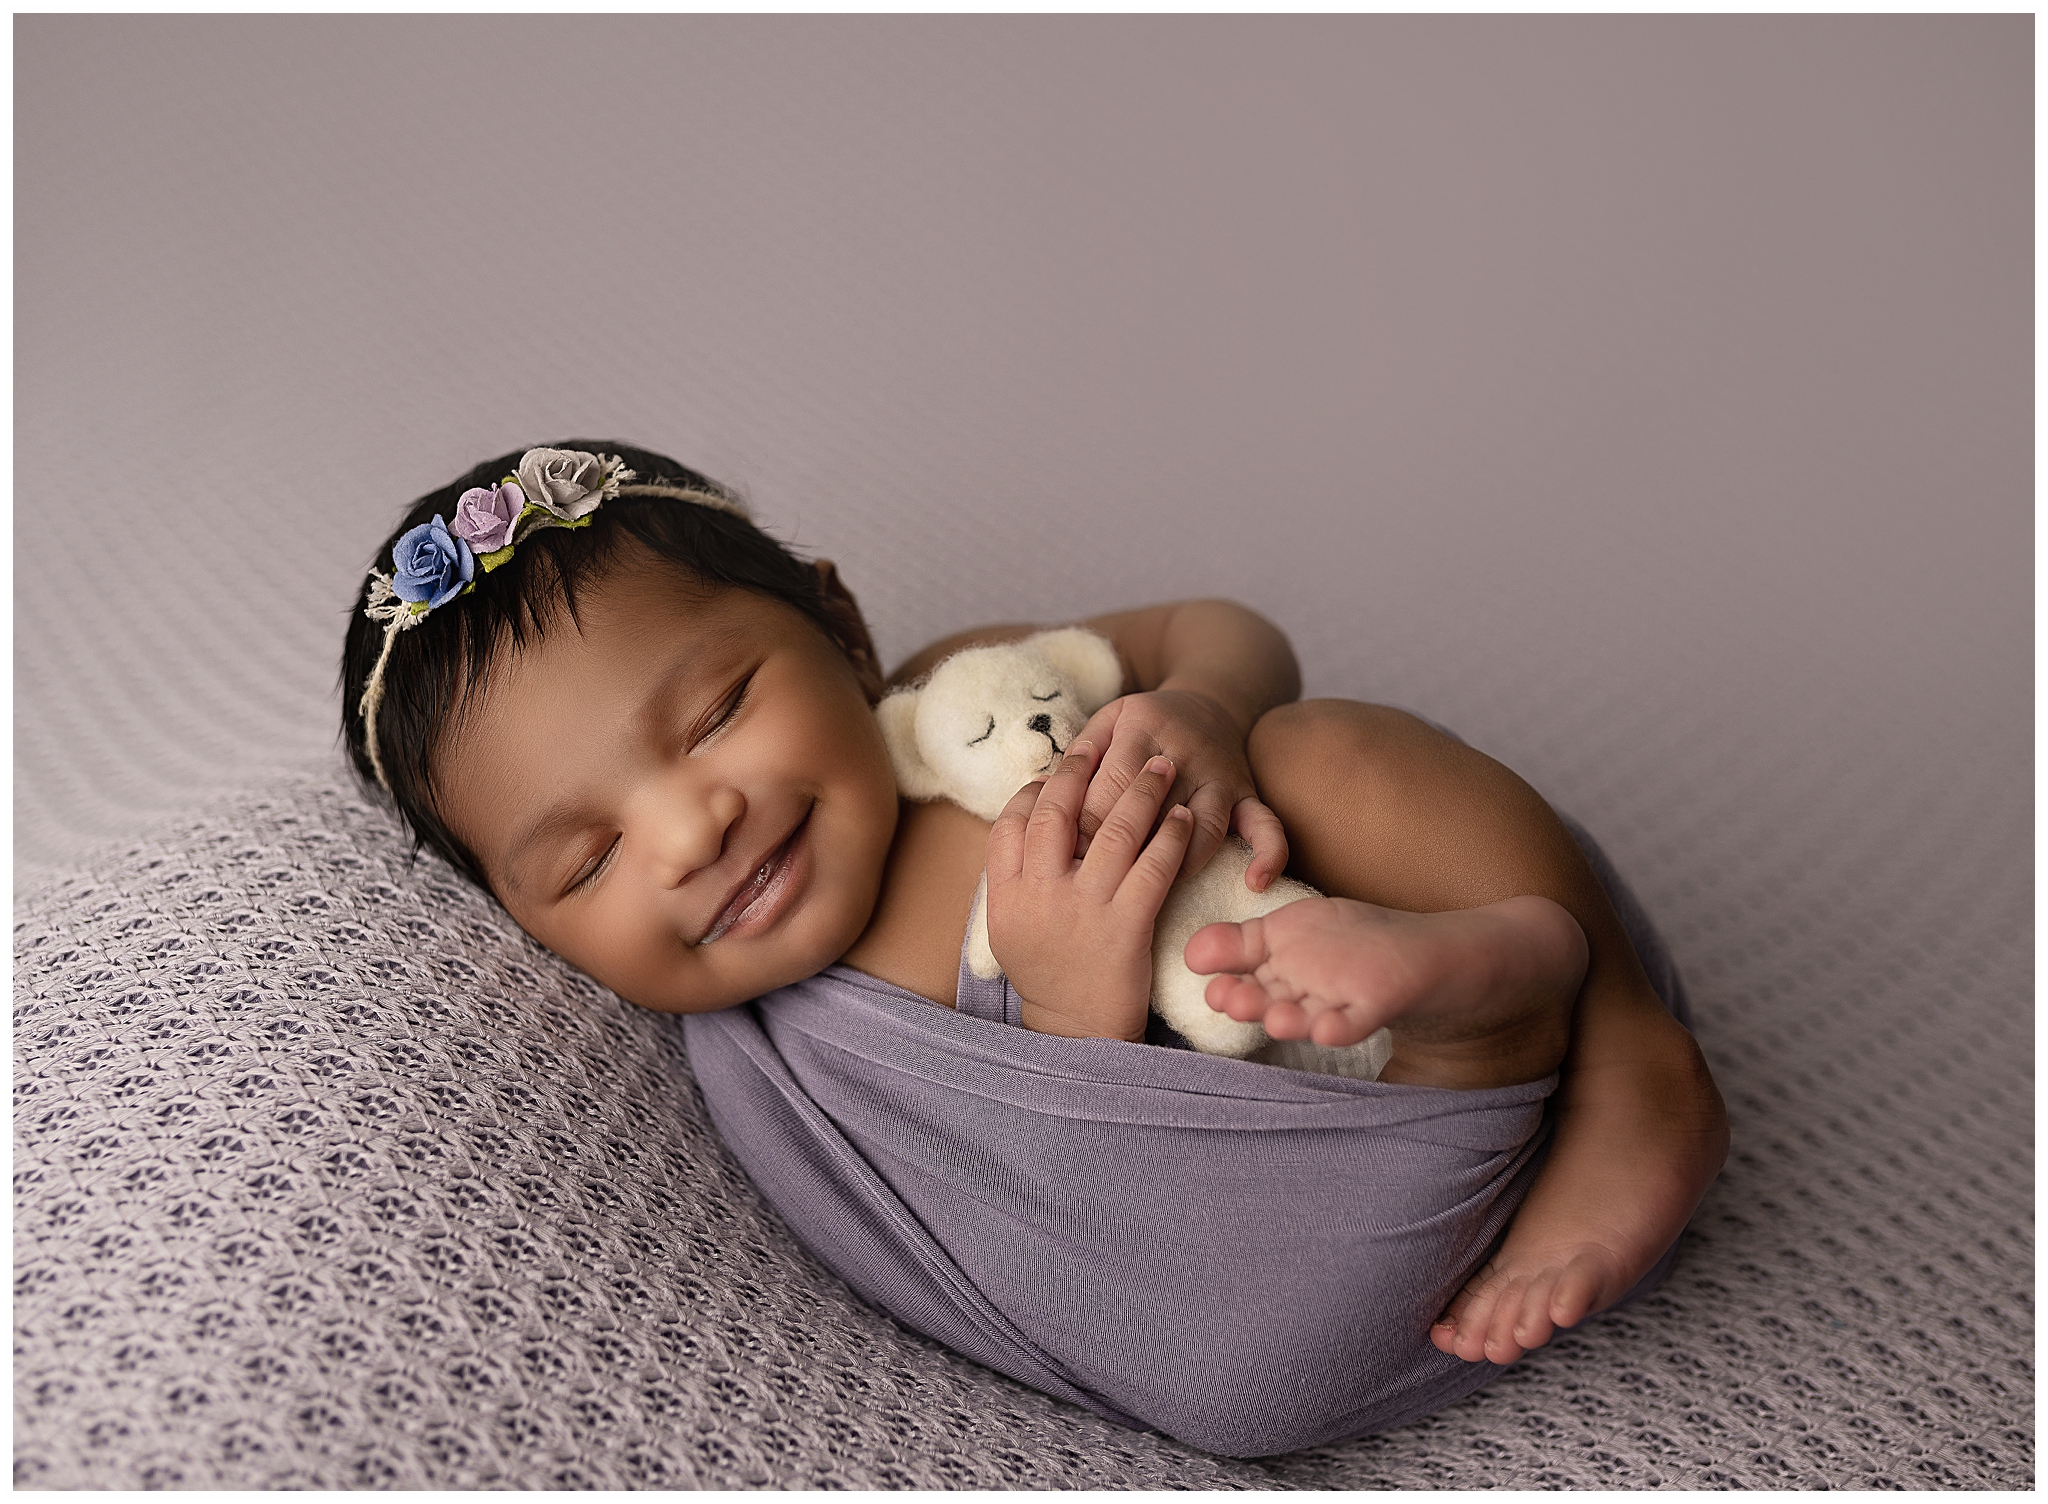 Smiling newborn baby wrapped in purple holding a white teddy bear.